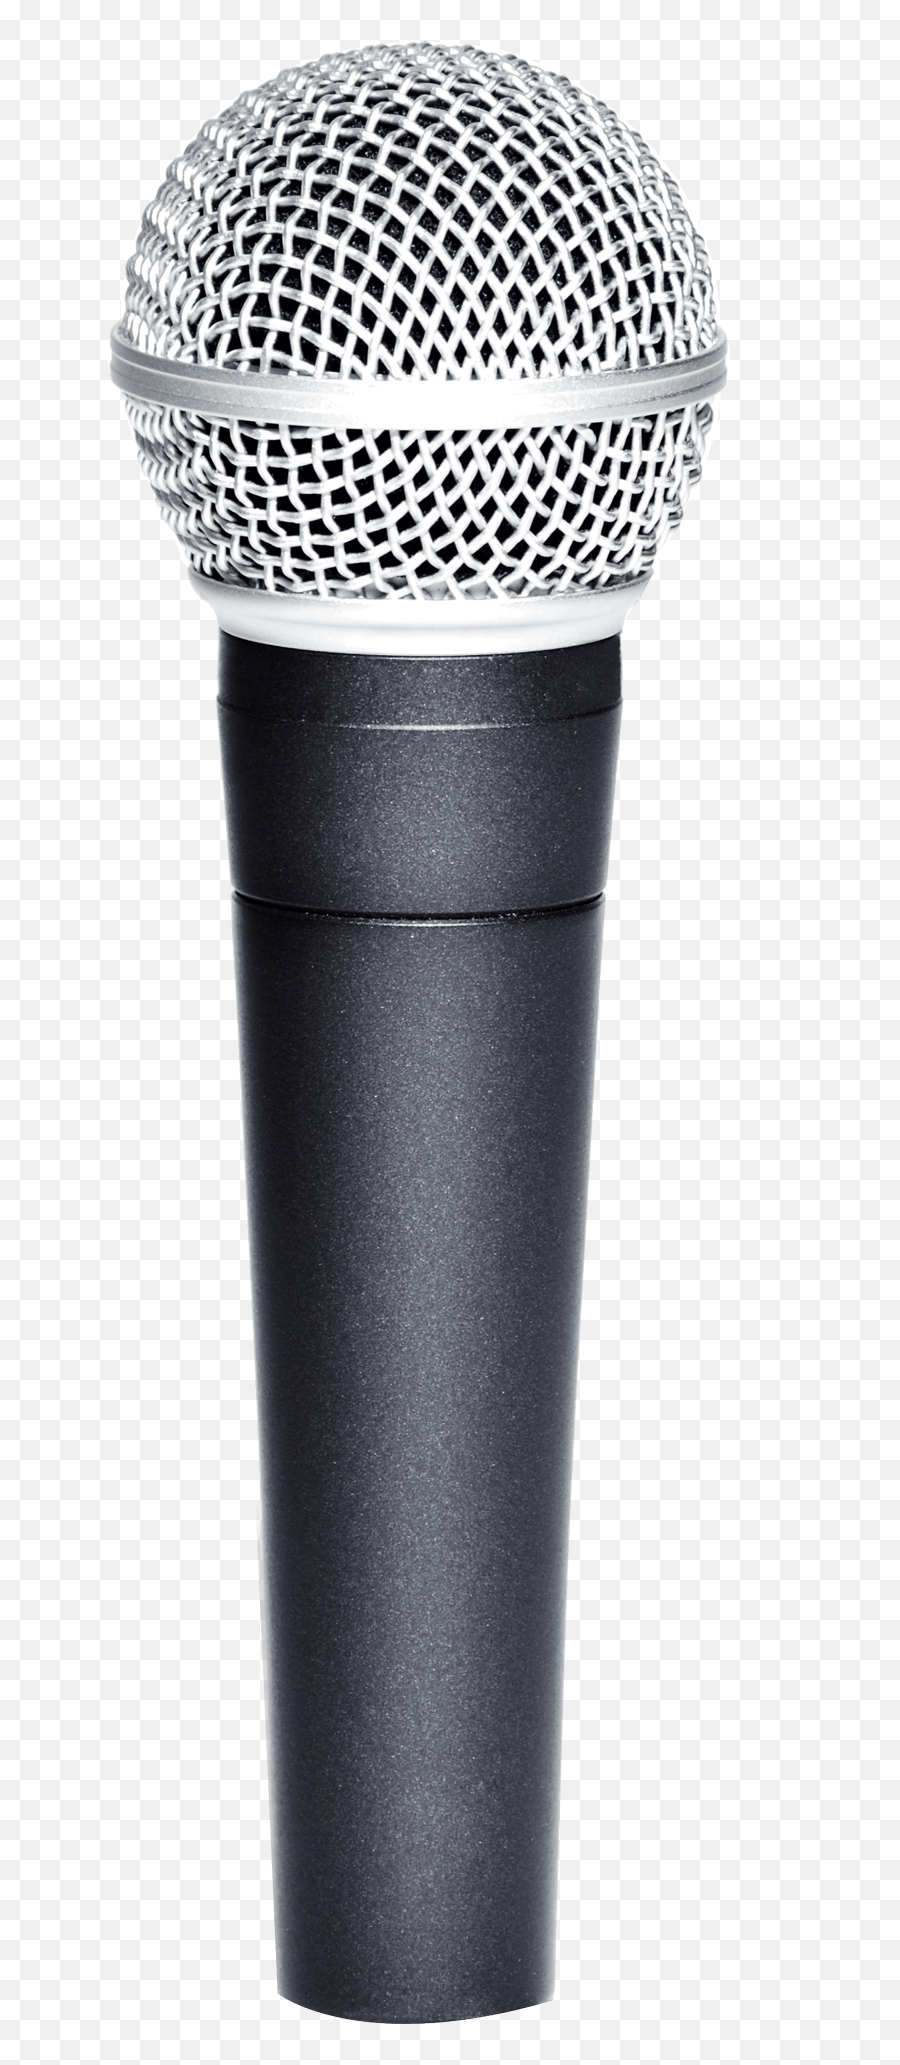 Microphone Transparent Microphone Images Transparent Free - Microphone Clipart Emoji,Emoji Gun And Microphone